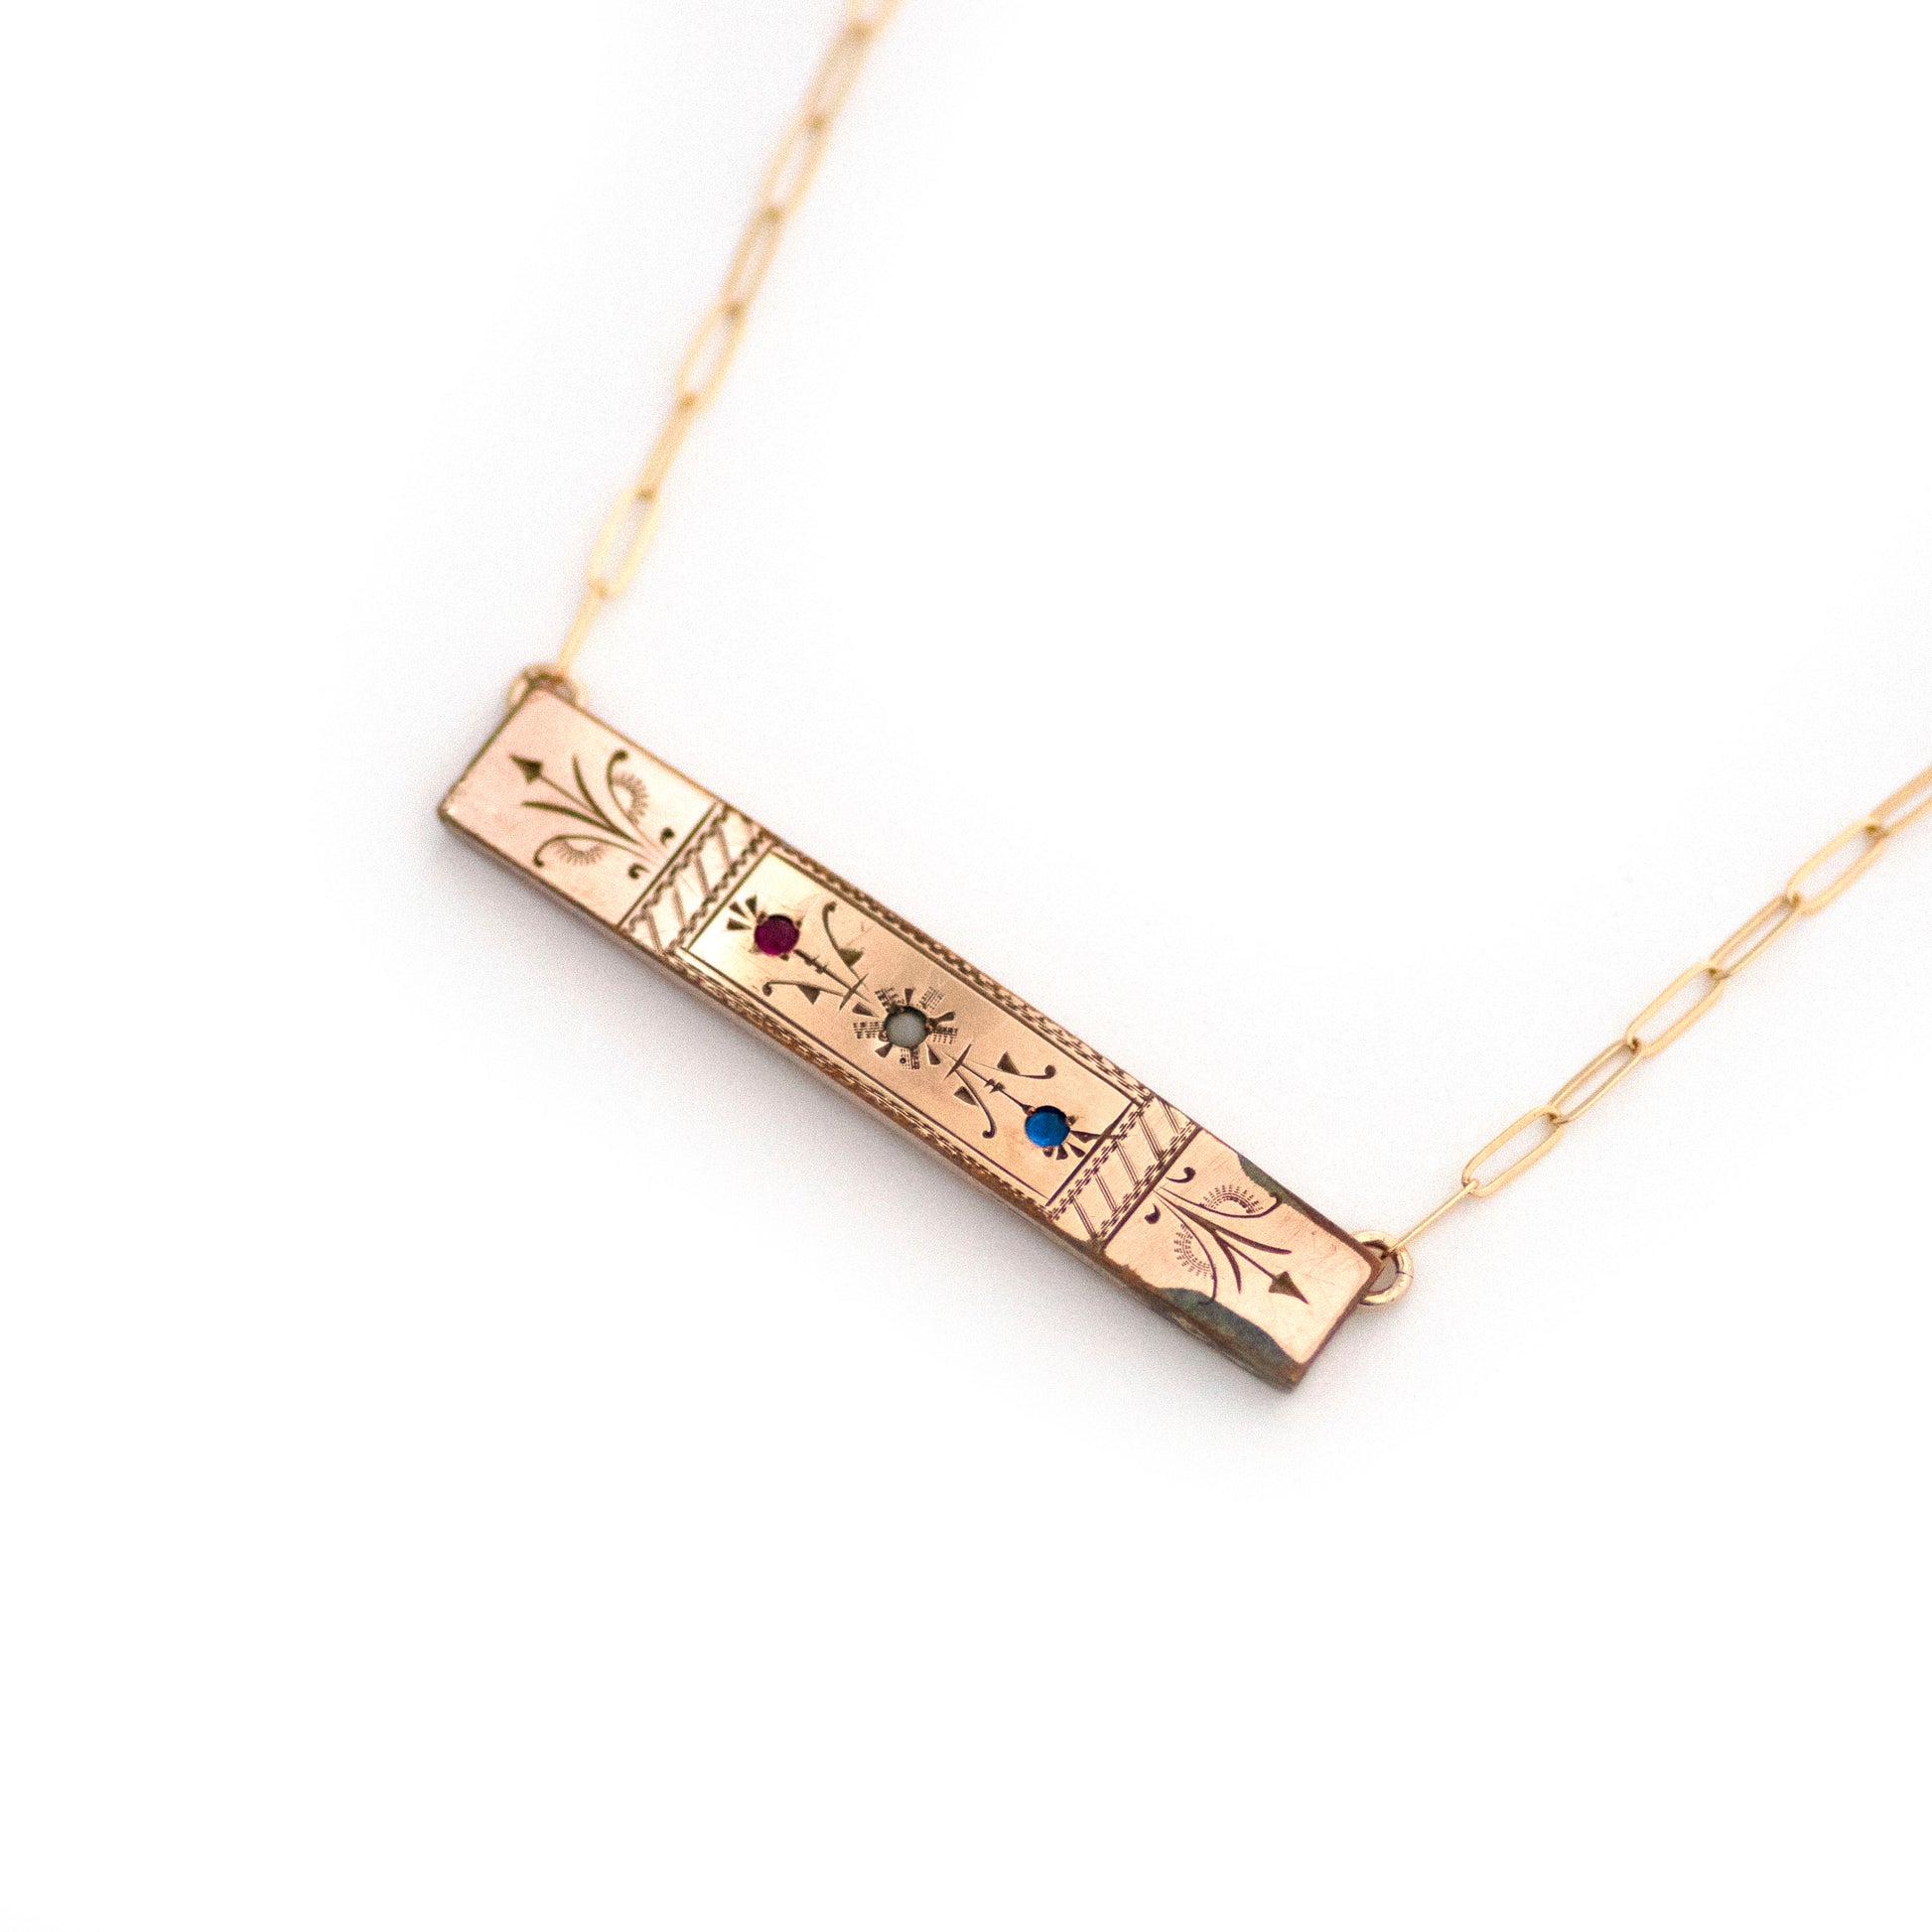 This one-of-a-kind conversion necklace is made up of:  Gold filled Victorian bar pin pendant from the late 1800s with hand tooled details and red, white and blue glass accents.